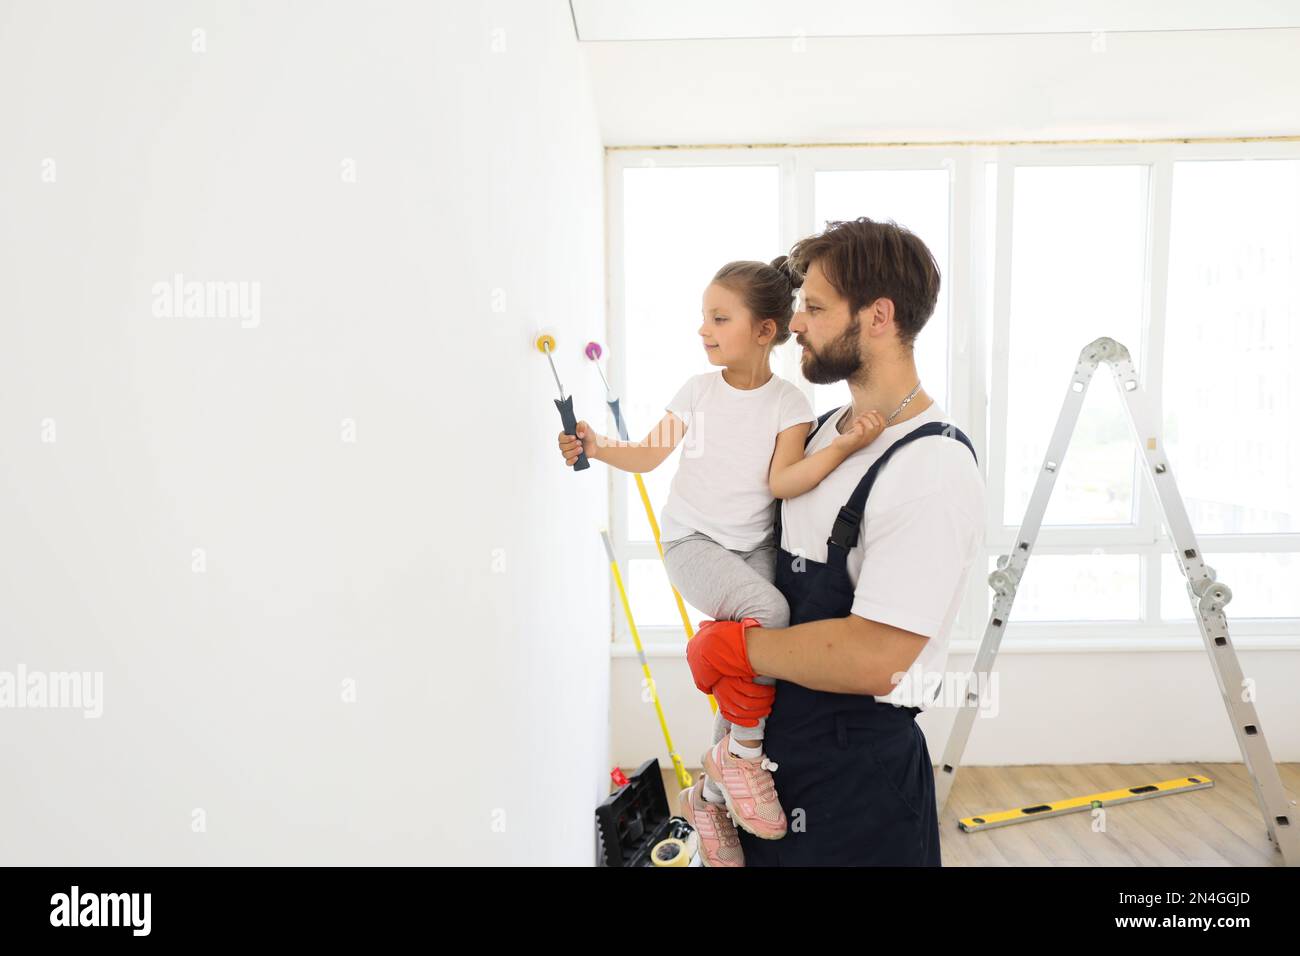 Smiling 5-year-old girl holds a paint roller in her hands. The child helps her father, who holding her, near the wall, in the repair. Stock Photo